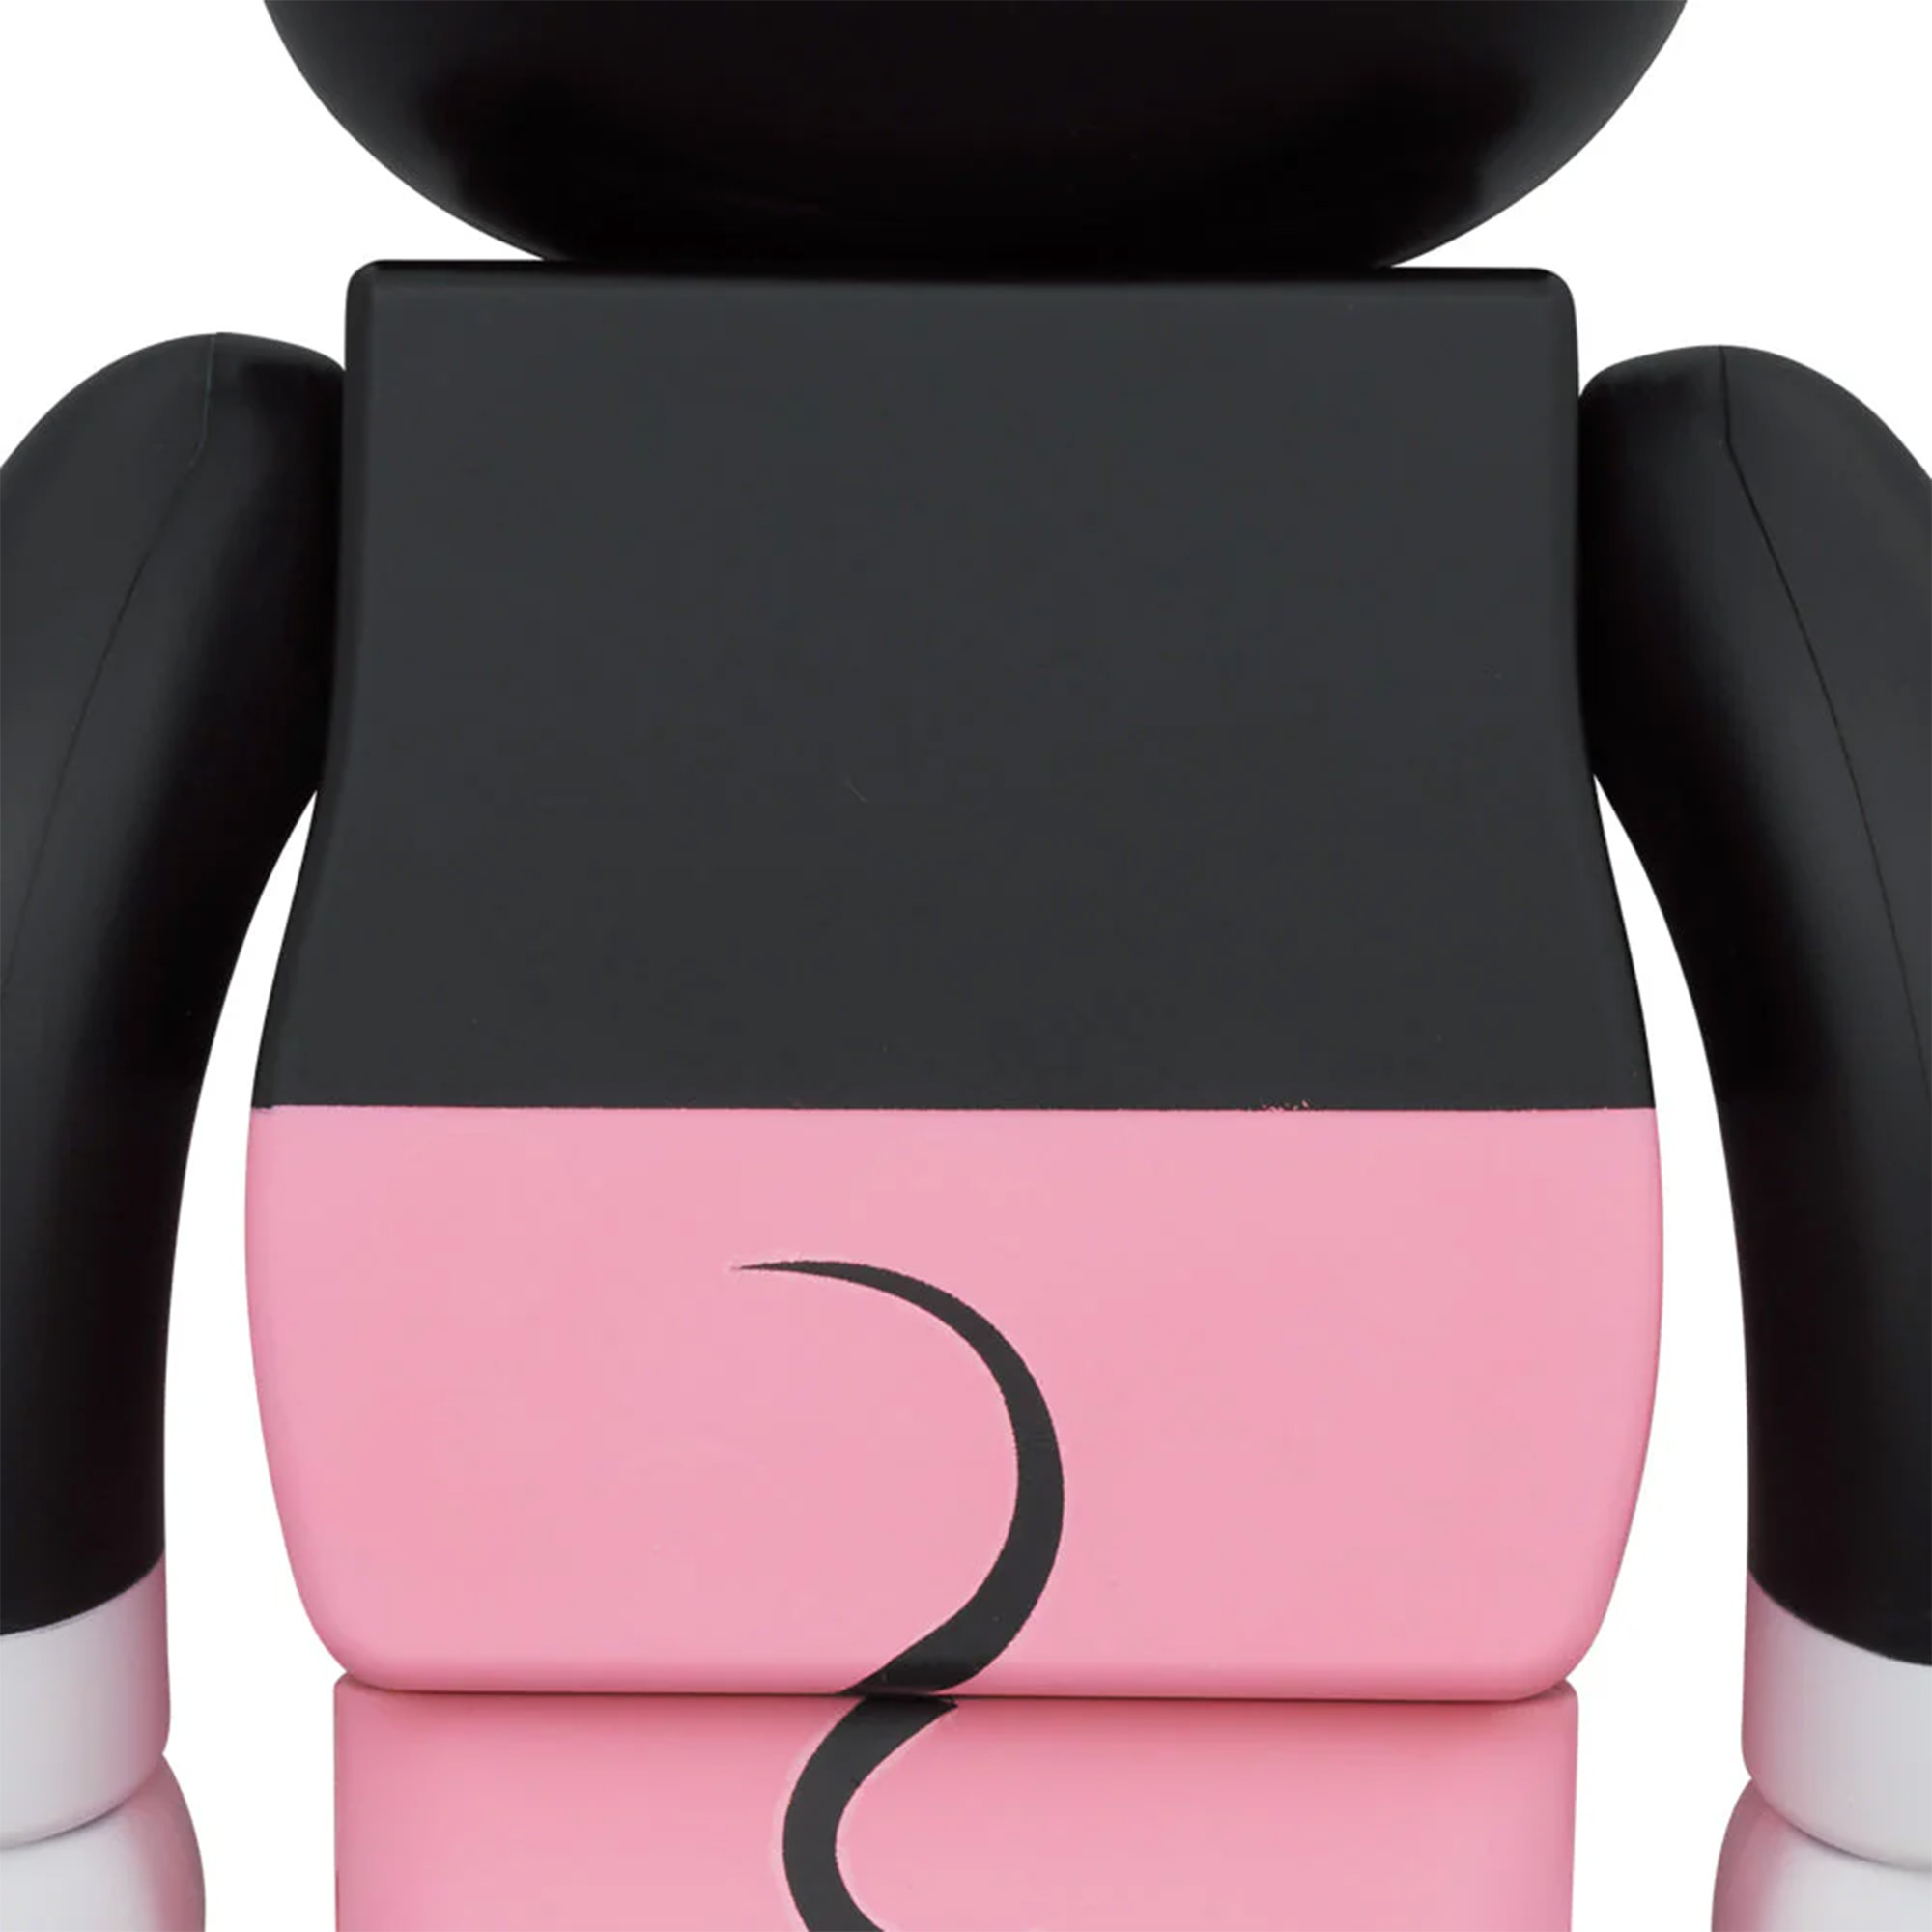 Buy BE@RBRICK Box Lunch Minnie Mouse 1000% from Medicom Toy | NO GA